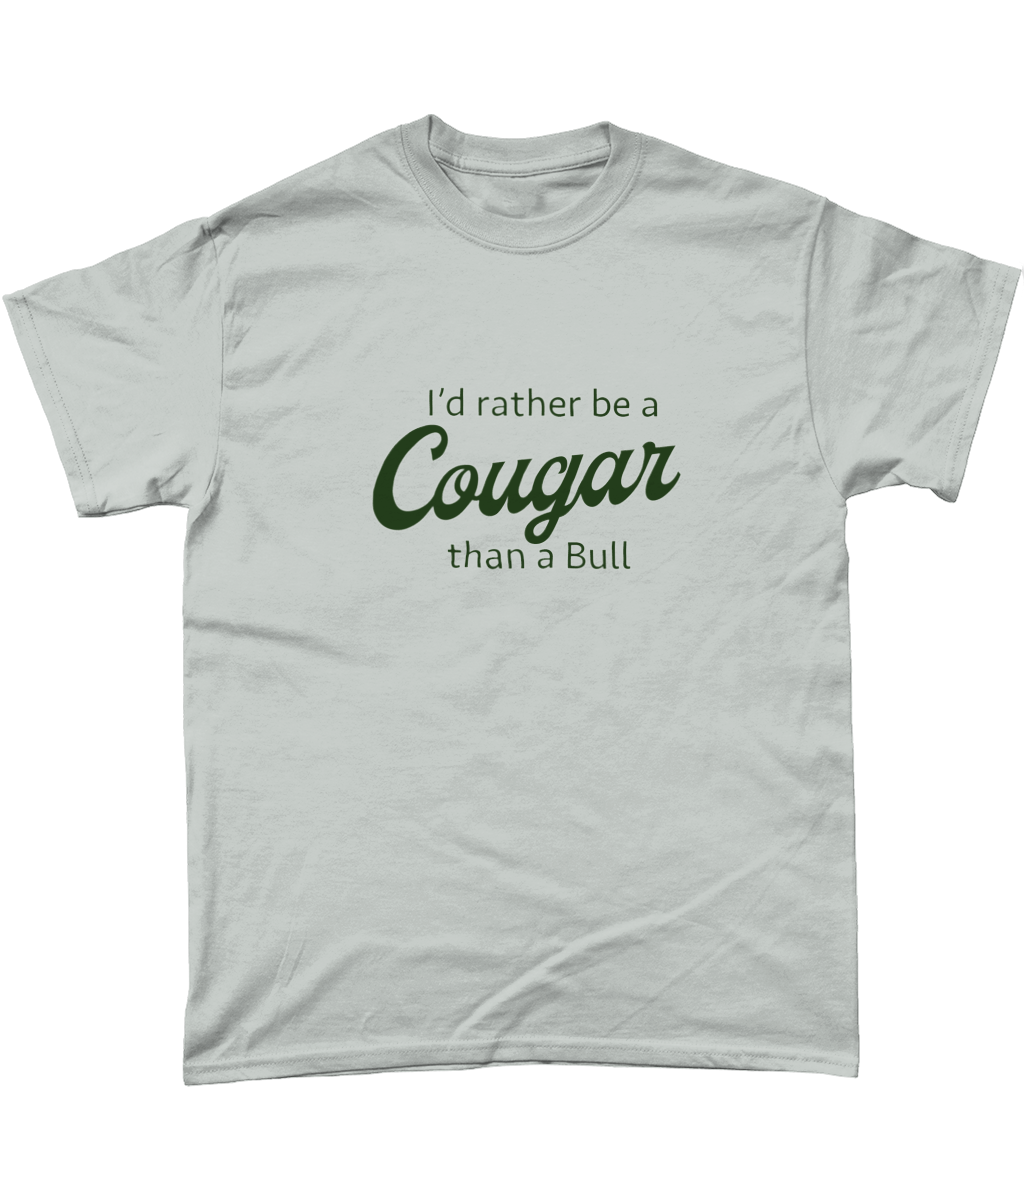 Keighley Cougars 'Rather be a Cougar' T-shirt in Ash Grey